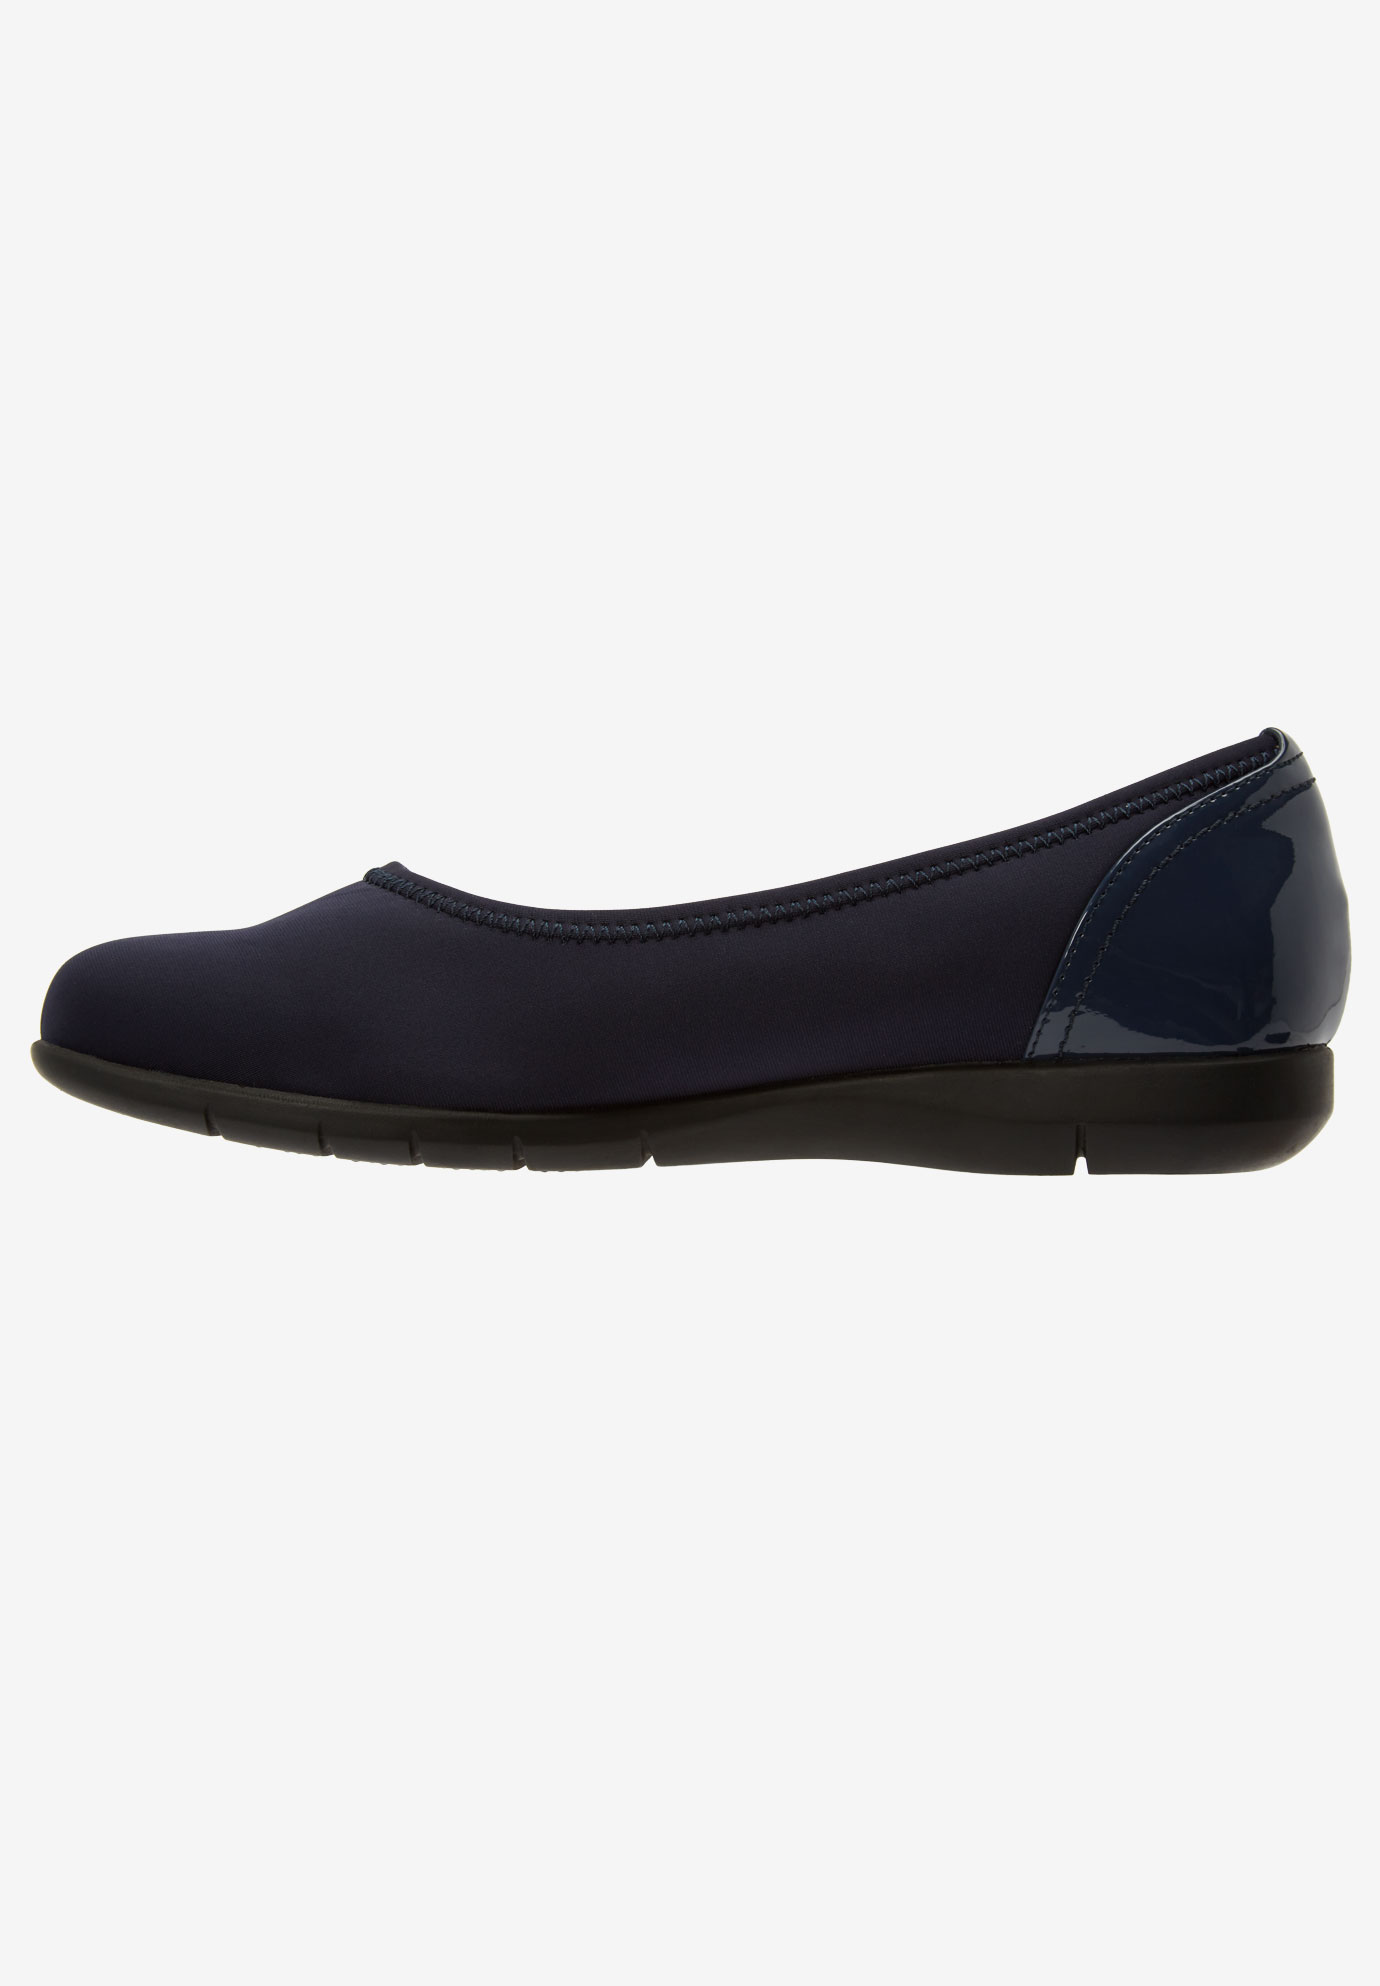 Comfortview Women's Wide Width The Lyra Slip On Flat Shoes - image 4 of 7